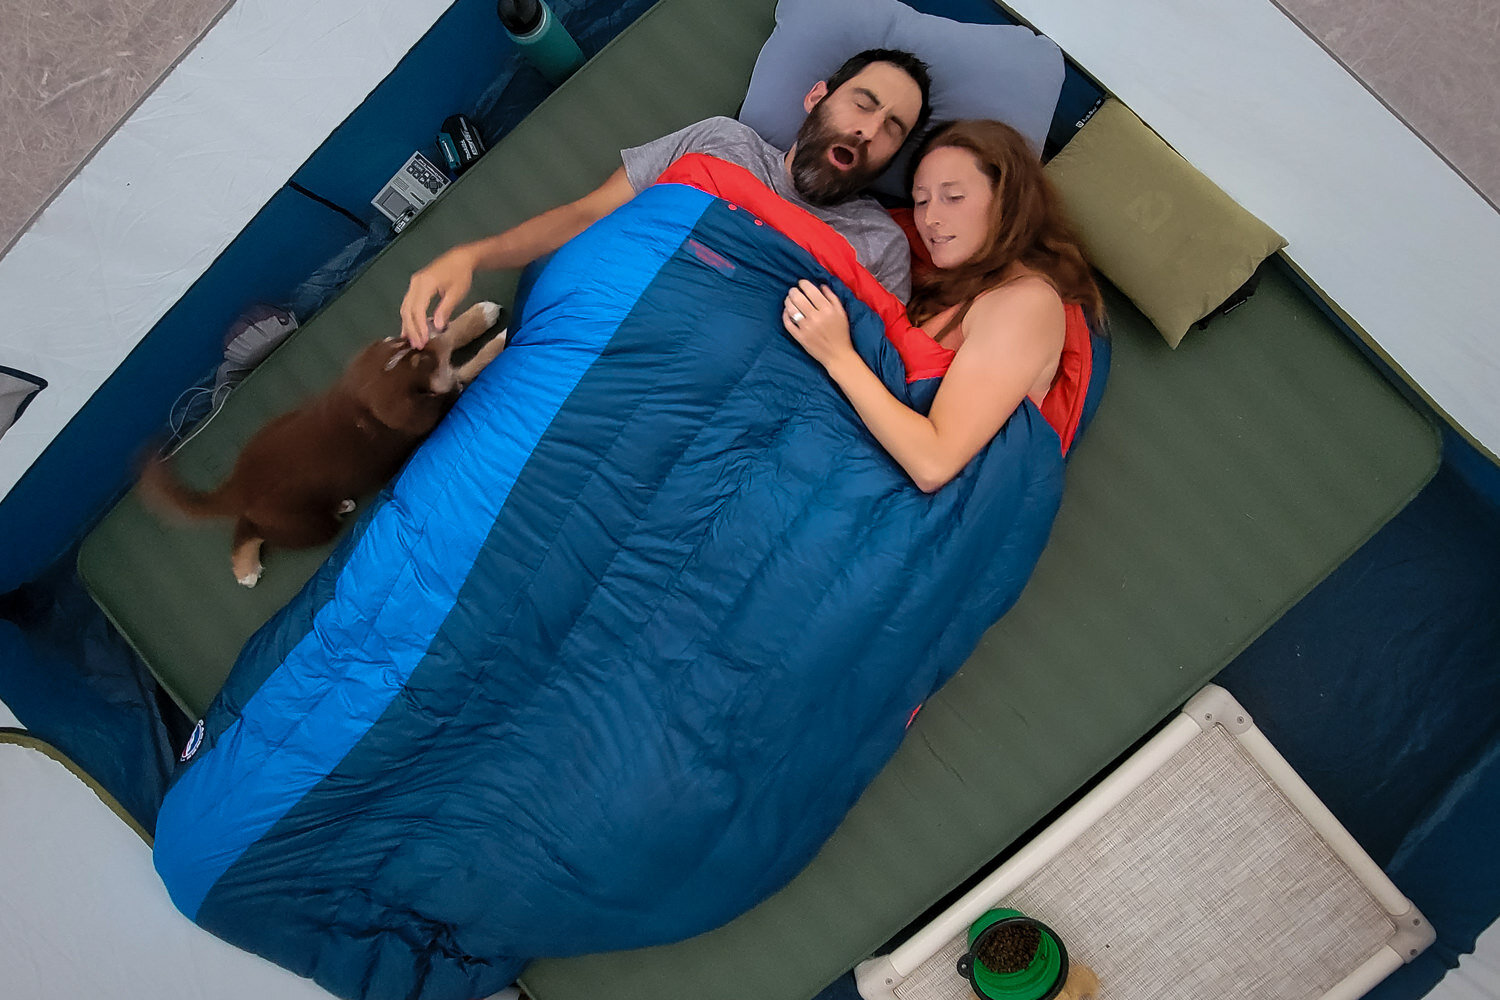 The Big Agnes King Solomon 15 is one of the warmest sleeping bags overall